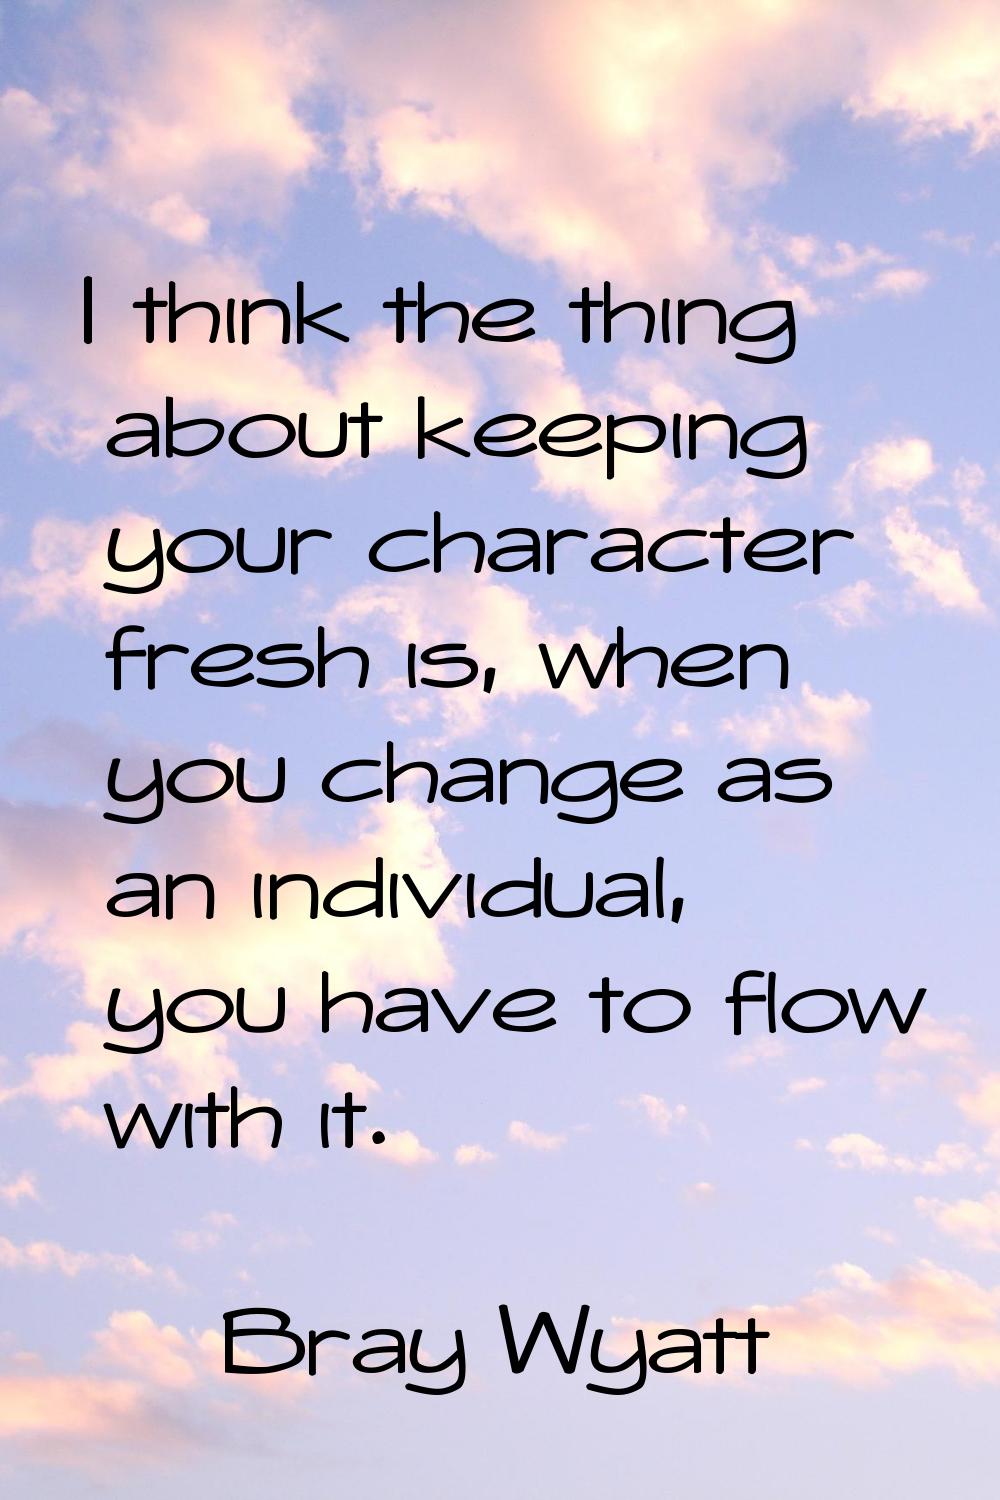 I think the thing about keeping your character fresh is, when you change as an individual, you have